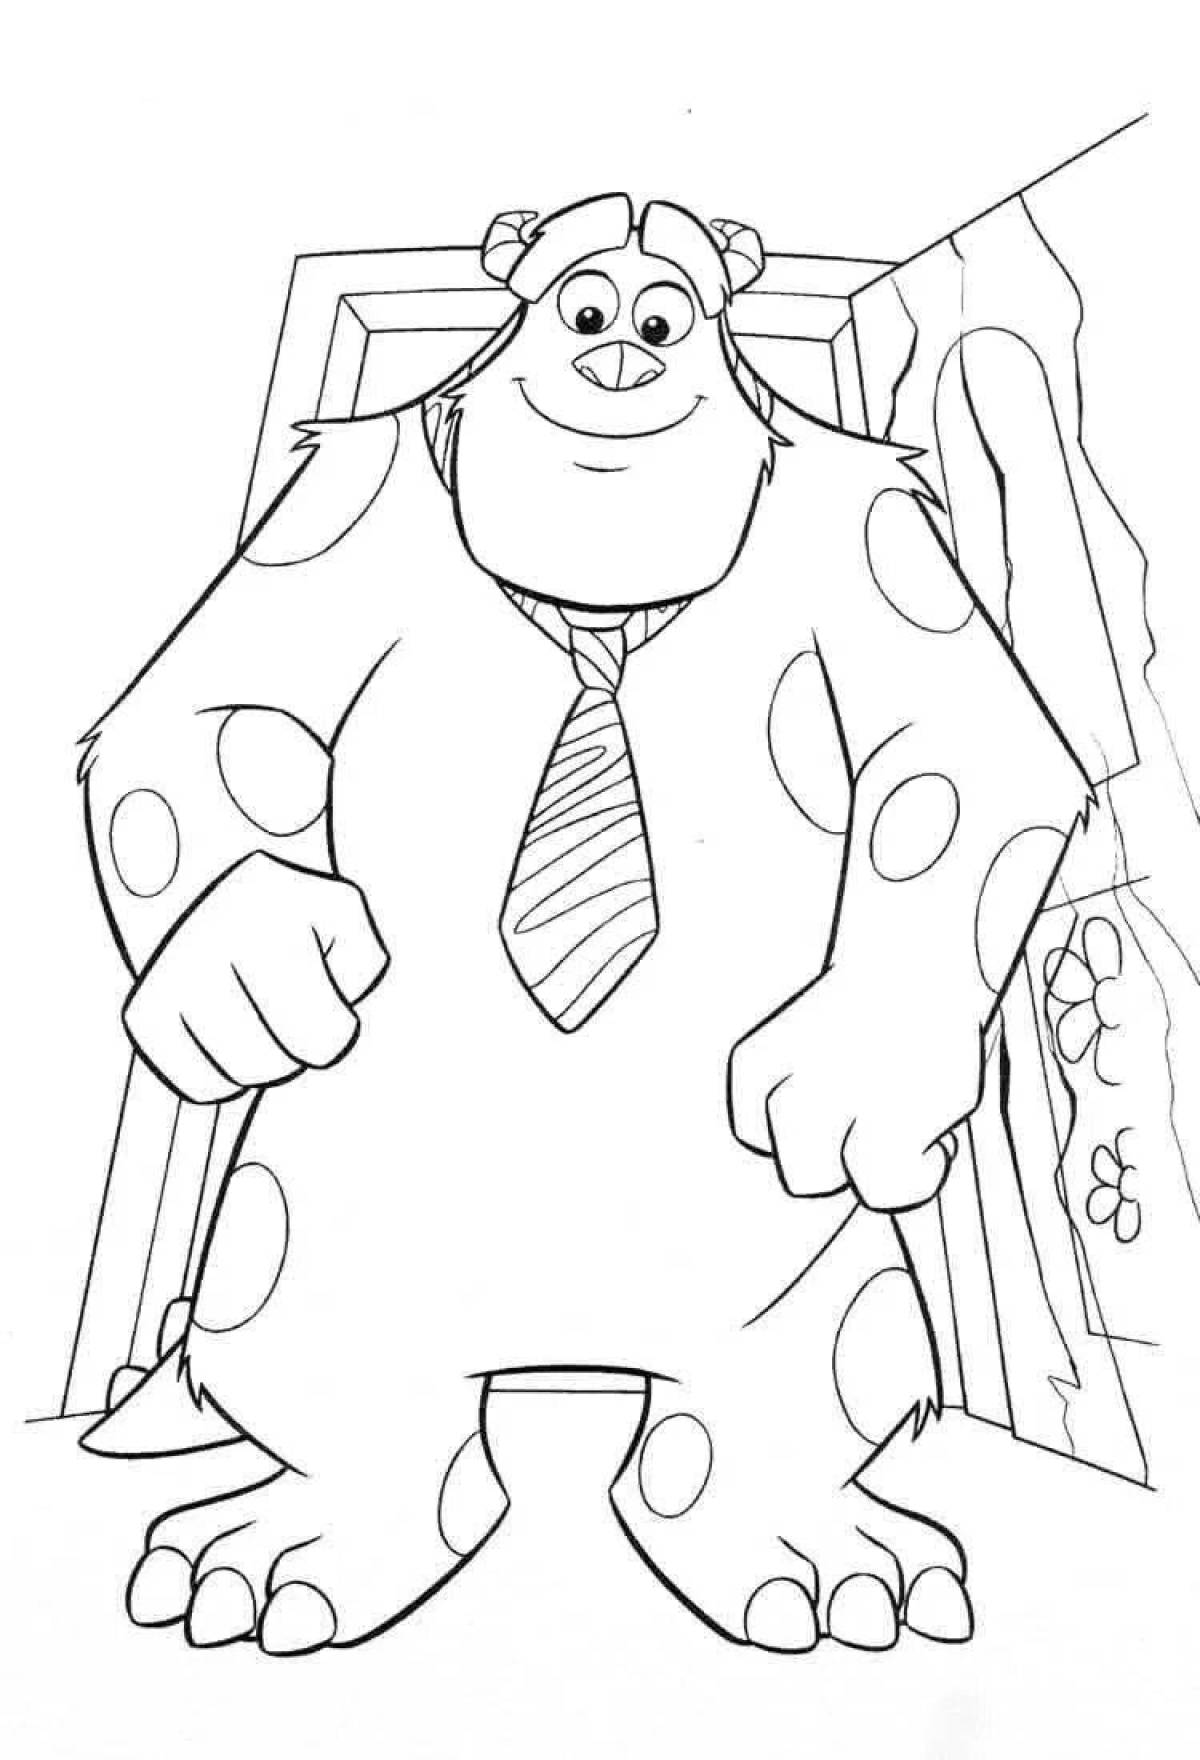 Colorful monsters inc coloring pages for kids